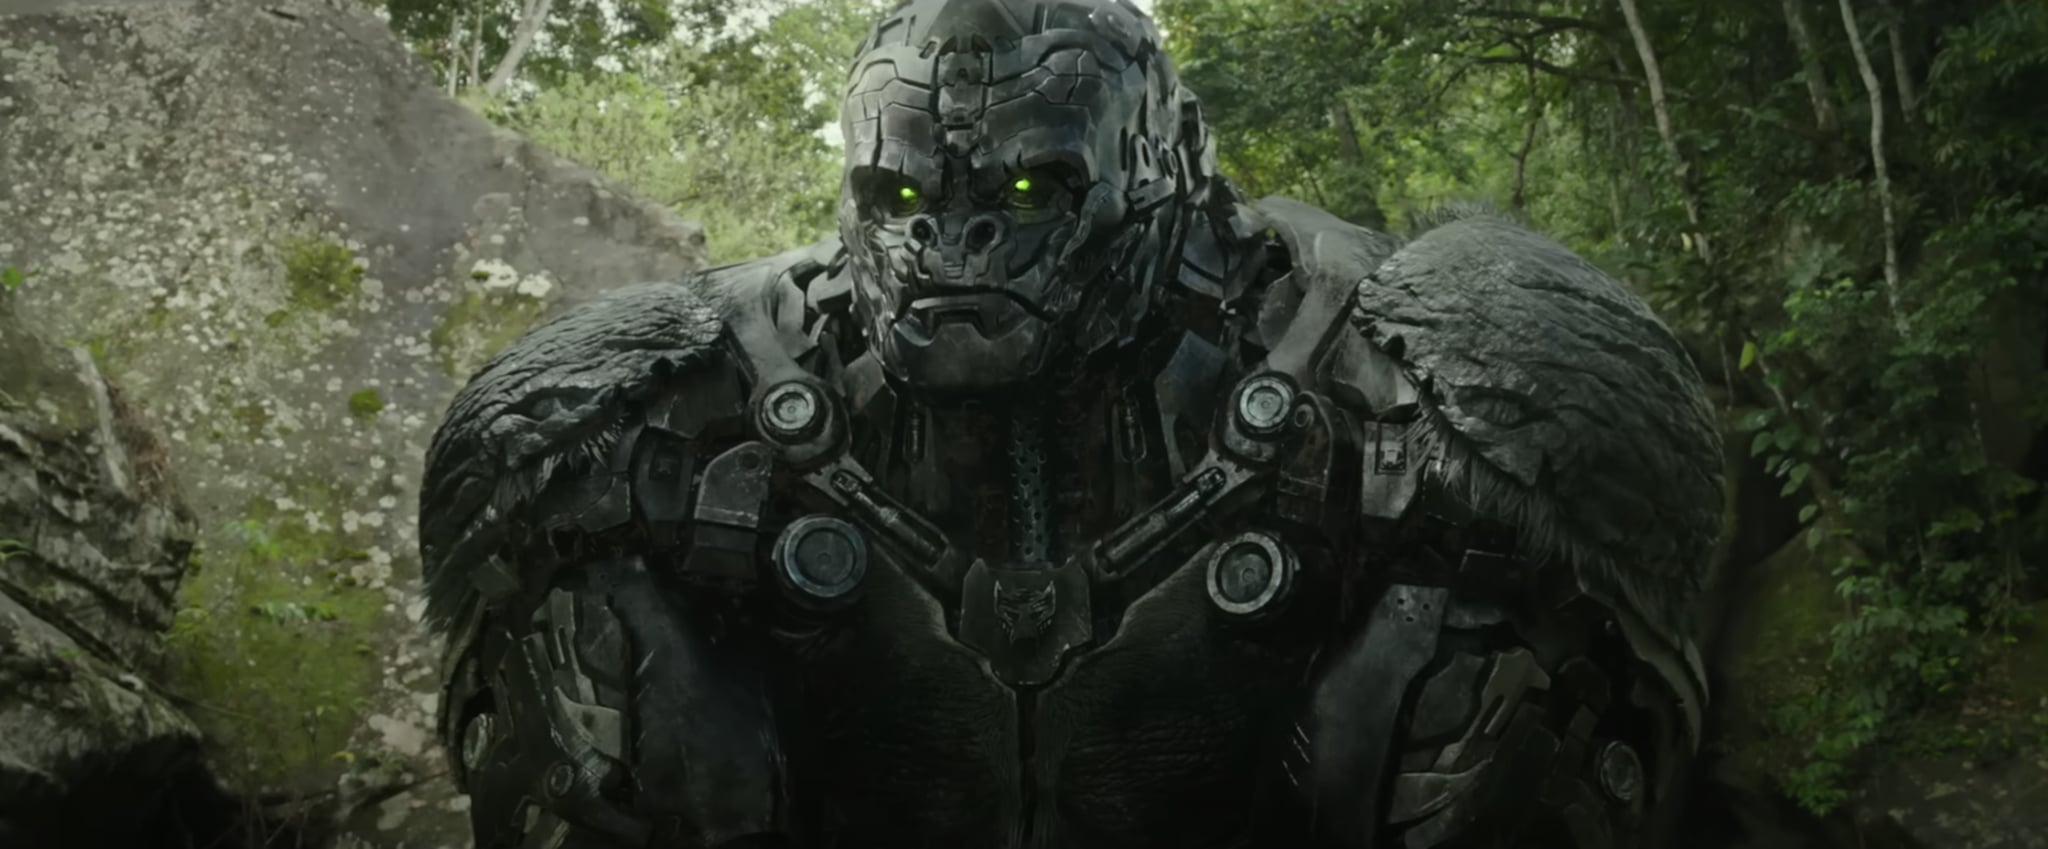 The First “Transformers: Rise of the Beasts” Trailer Introduces Gorilla Bot Optimus Primal